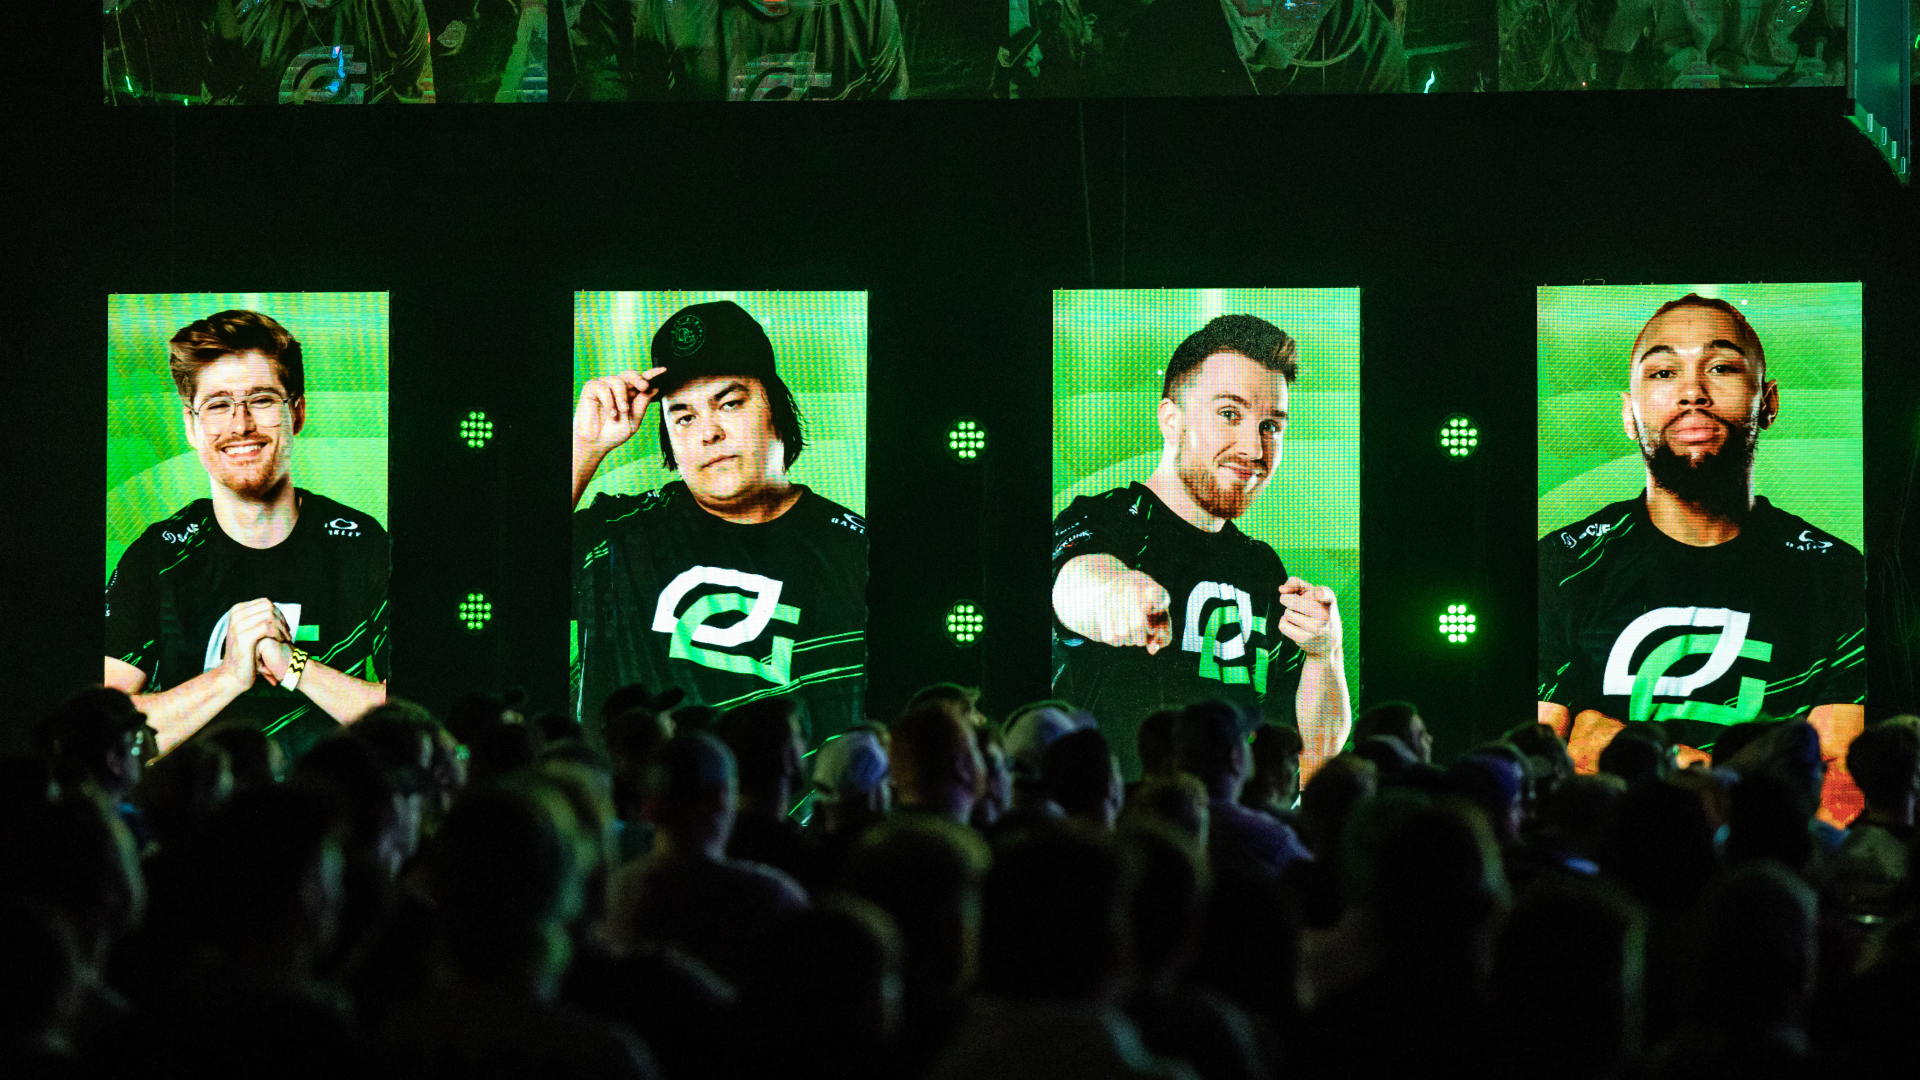 Optic Gaming players on LED screens illuminating fans in the crowd in green light